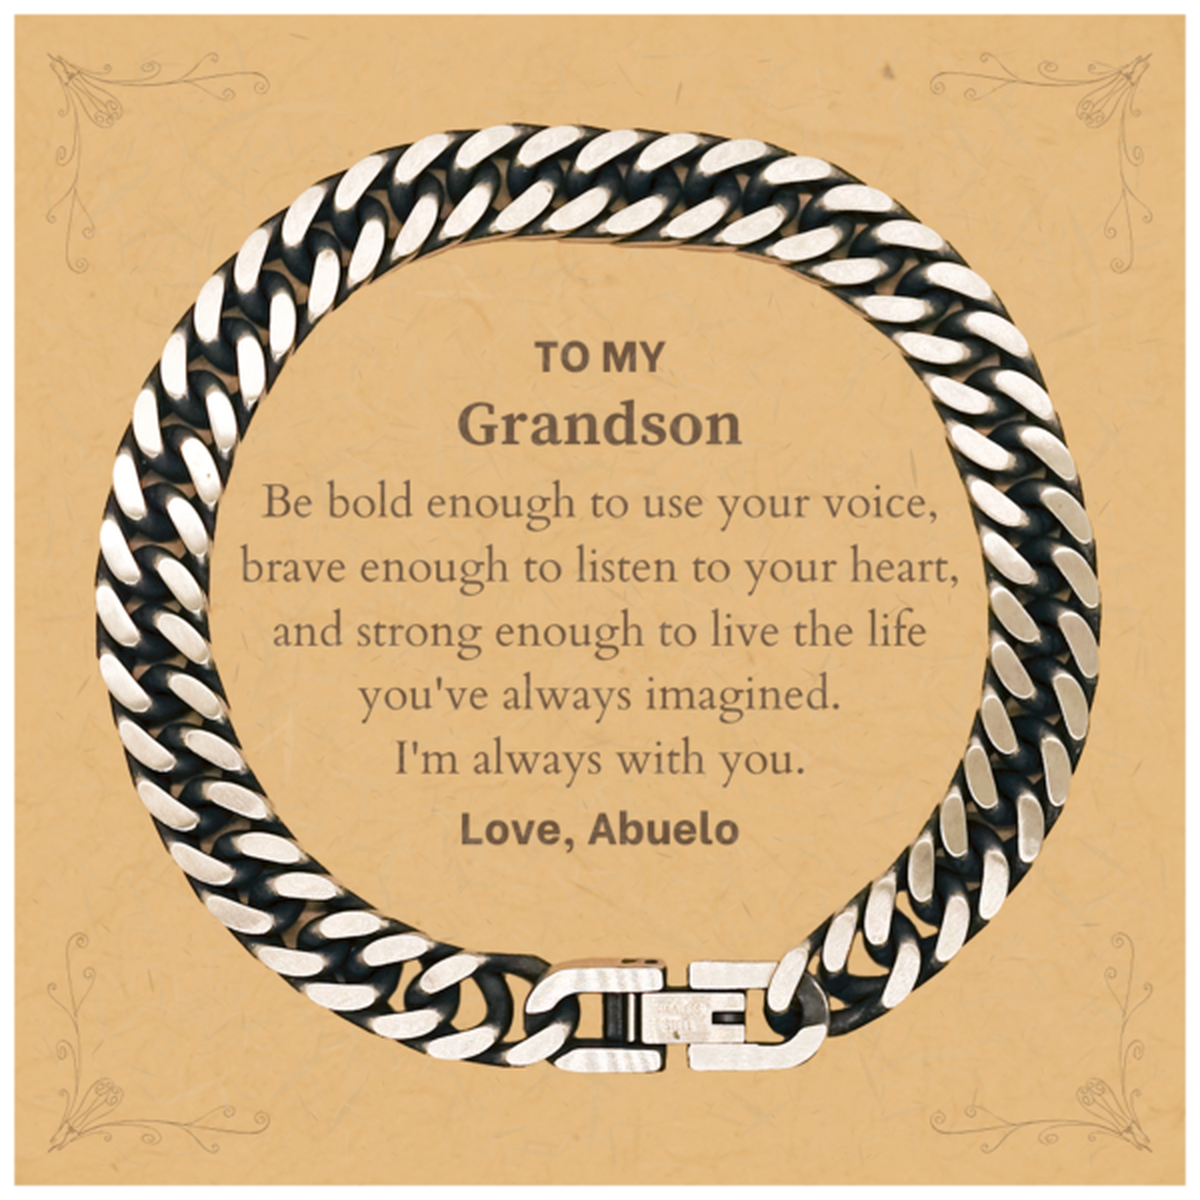 Keepsake Grandson Cuban Link Chain Bracelet Gift Idea Graduation Christmas Birthday Grandson from Abuelo, Grandson Be bold enough to use your voice, brave enough to listen to your heart. Love, Abuelo